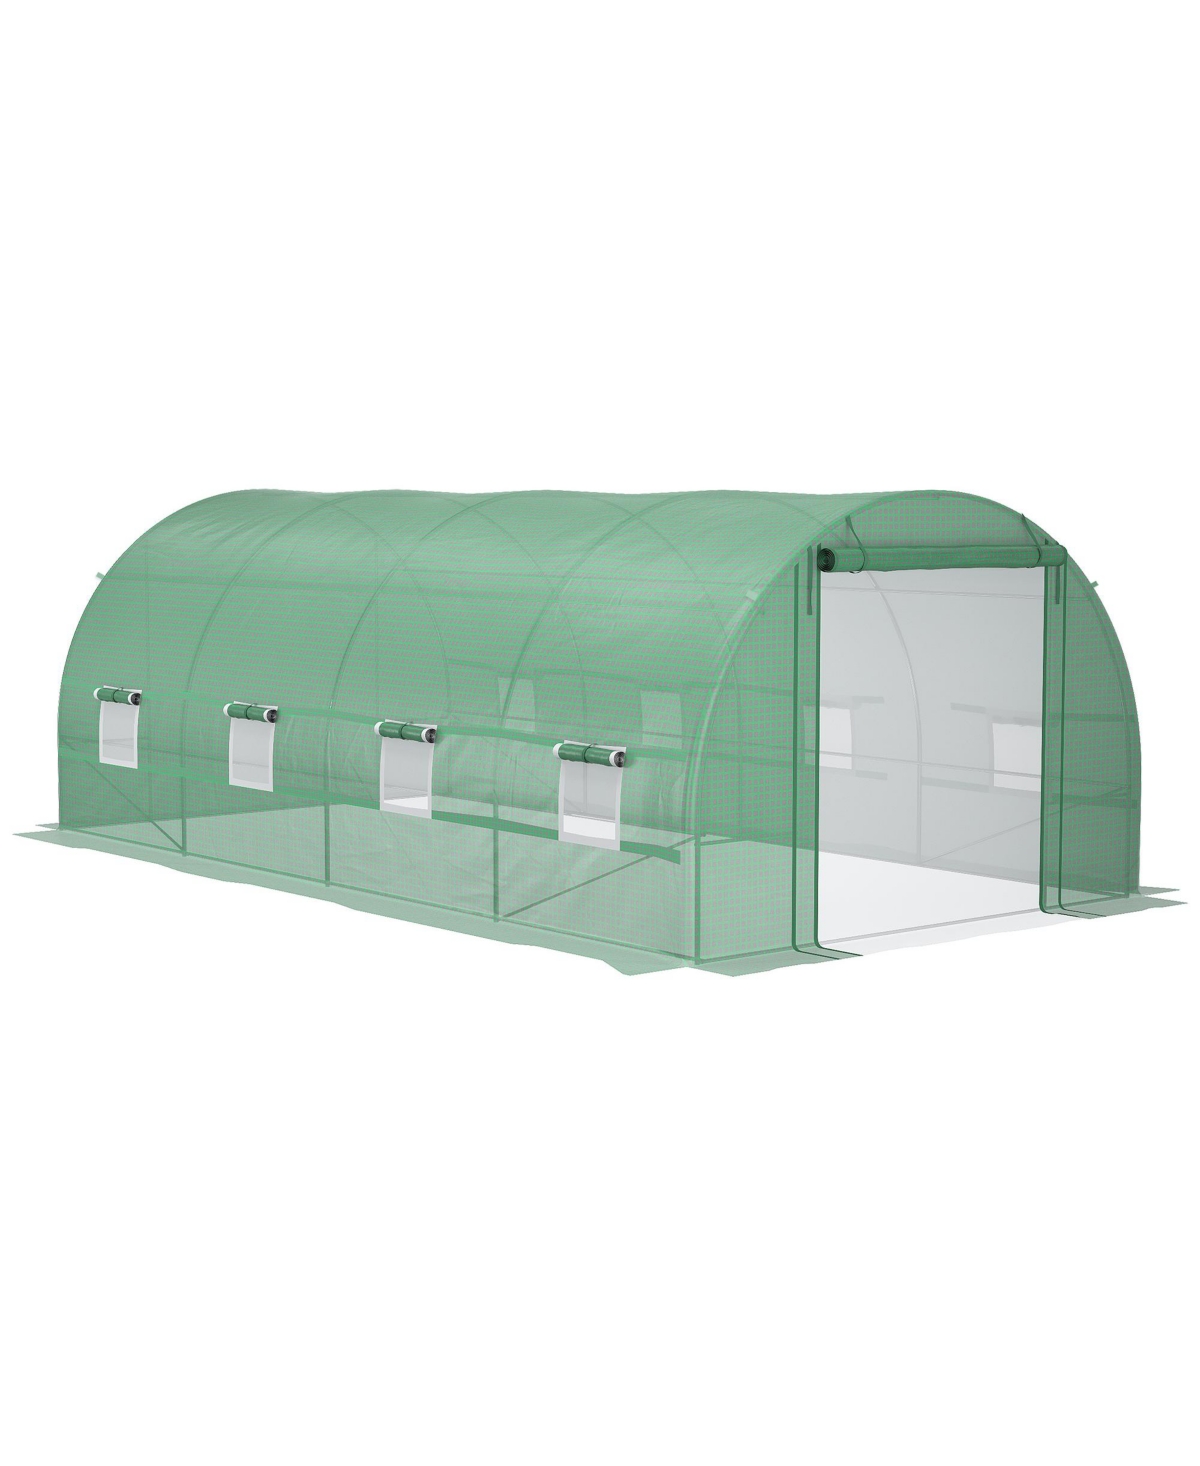 20' x 10' x 7' Walk-In Tunnel Greenhouse, Large Garden Hot House Kit with 8 Roll-up Windows & Roll Up Door, Steel Frame, Green - Green